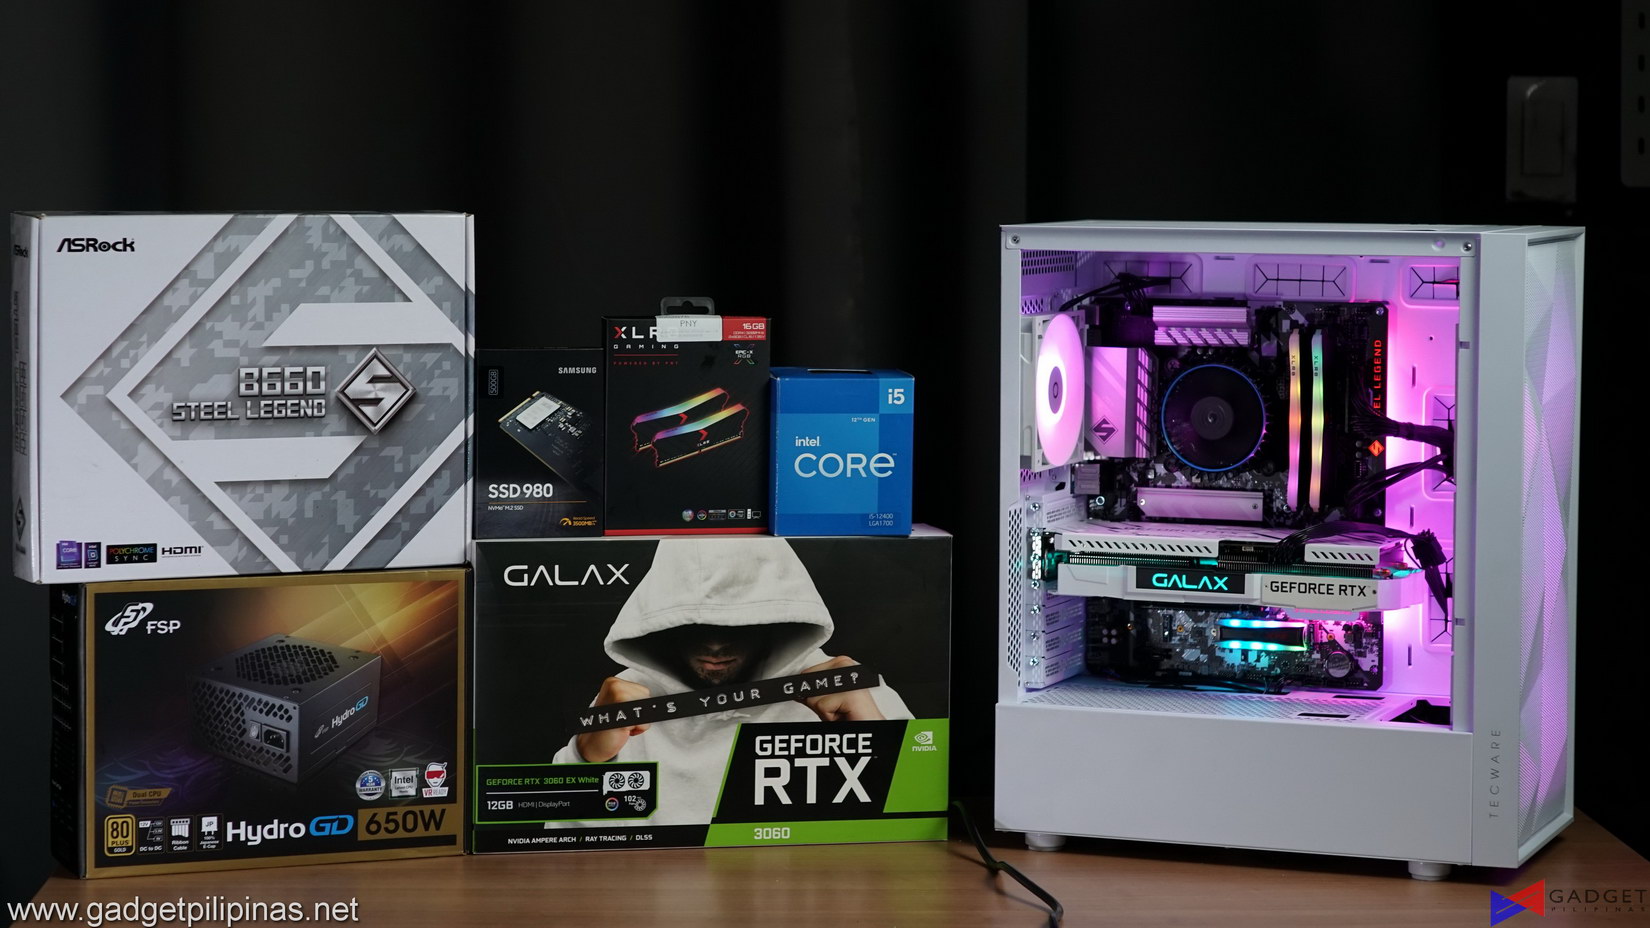 Php 50k Gaming PC Build Guide (Q1 2023) Benchmarks - Core i5 12400 + RTX 3060 - Gadget Pilipinas | Tech News, Reviews, Benchmarks and Build